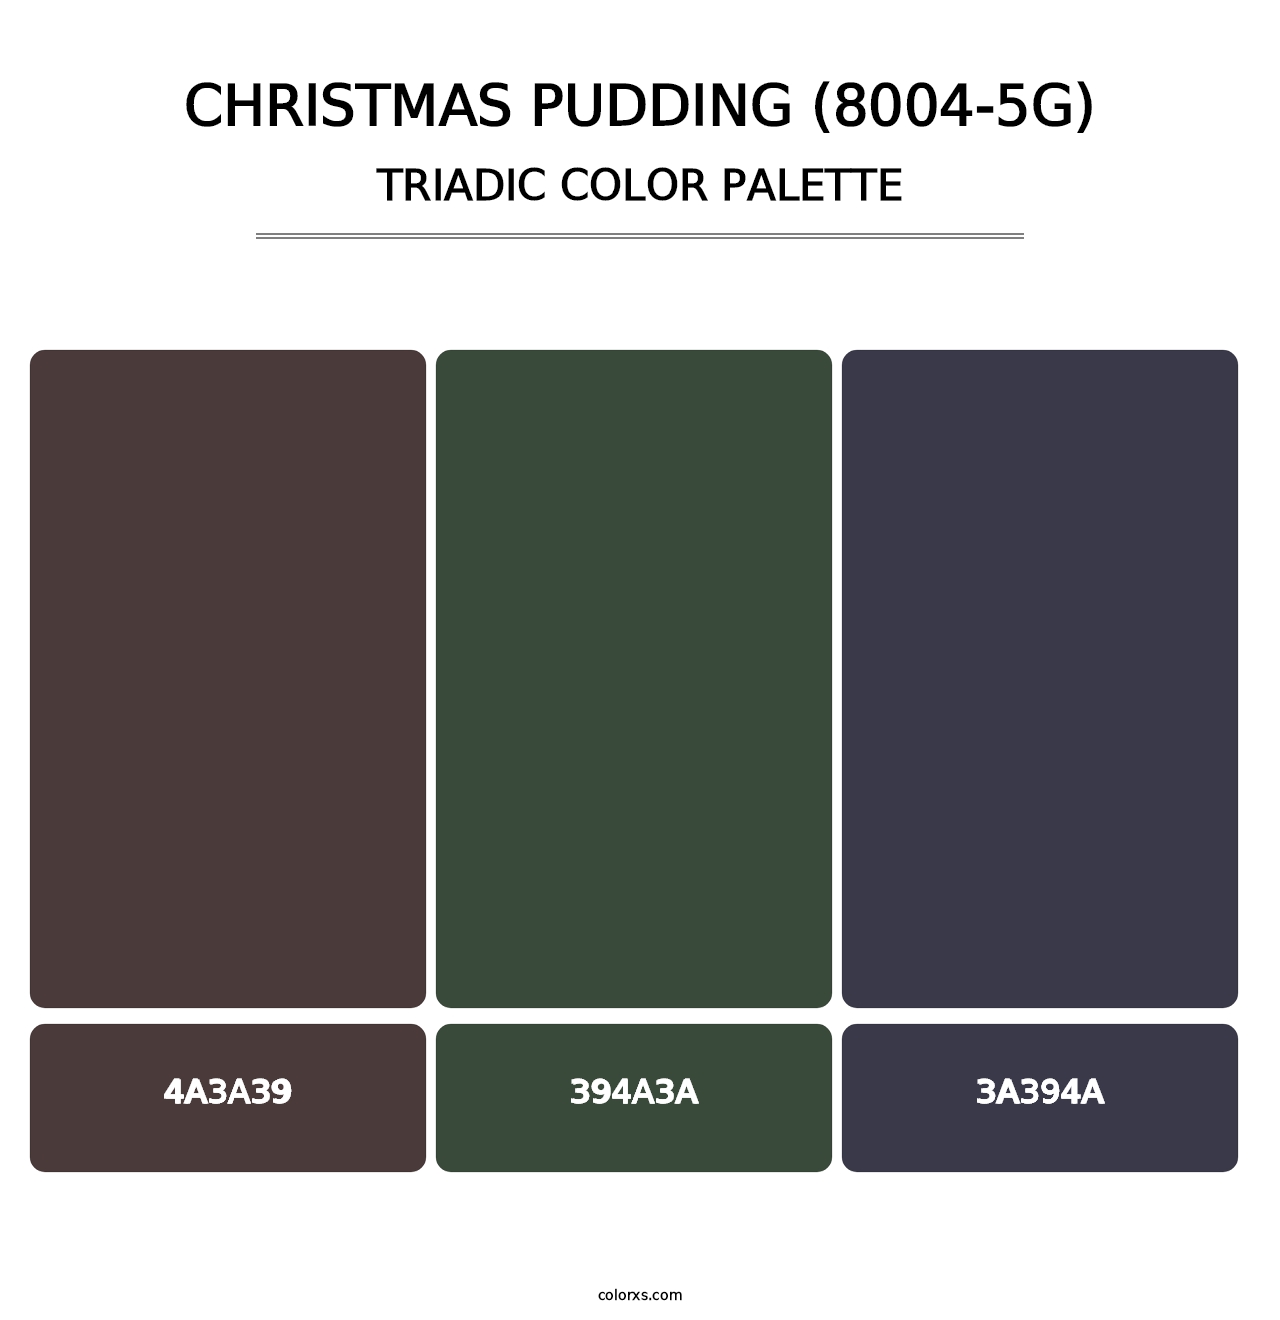 Christmas Pudding (8004-5G) - Triadic Color Palette